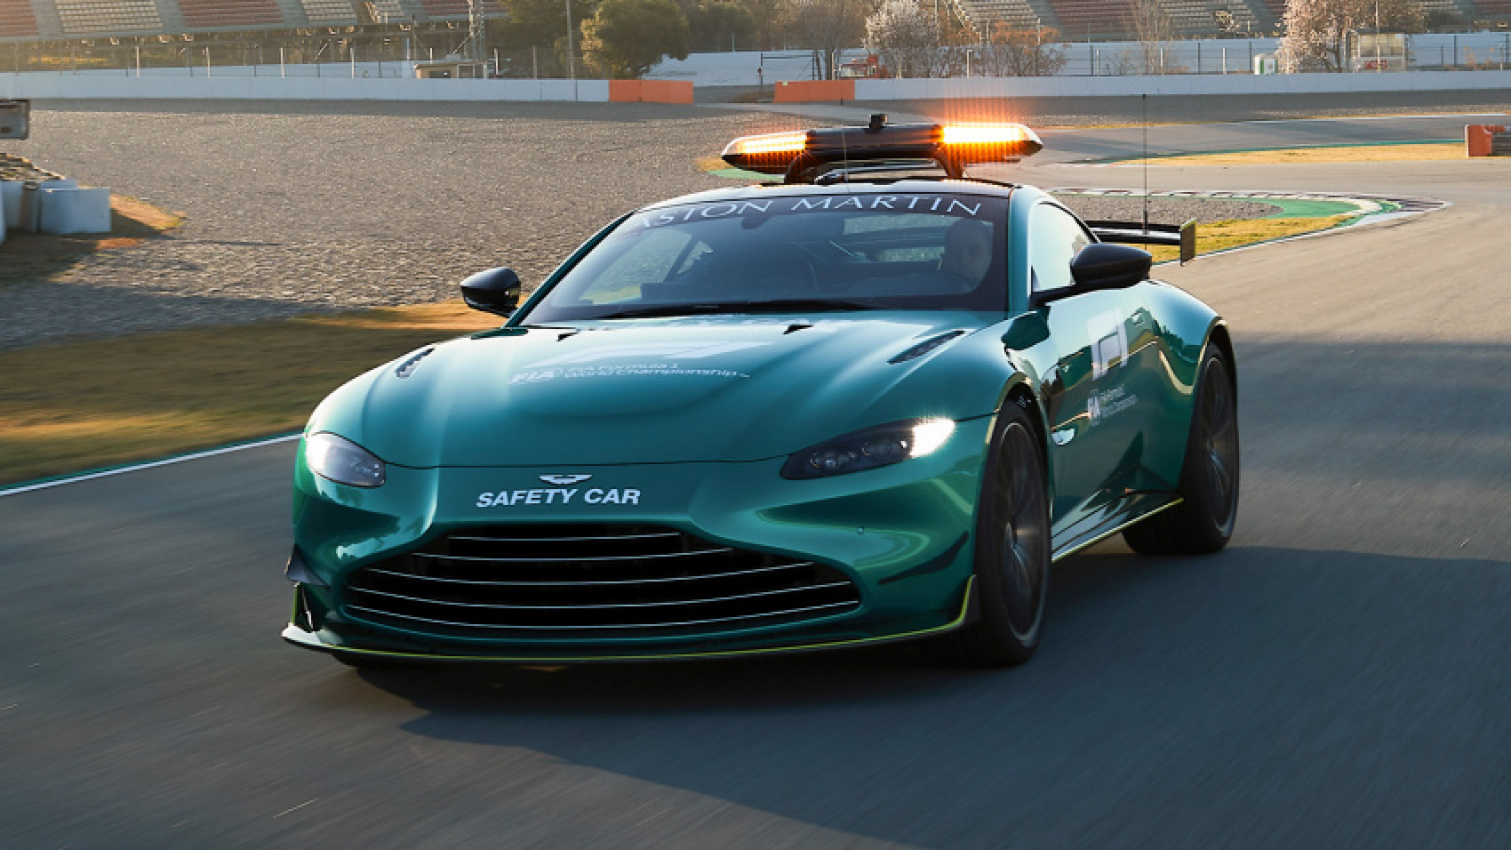 aston martin, autos, cars, f1 drivers think the aston martin safety car is too slow